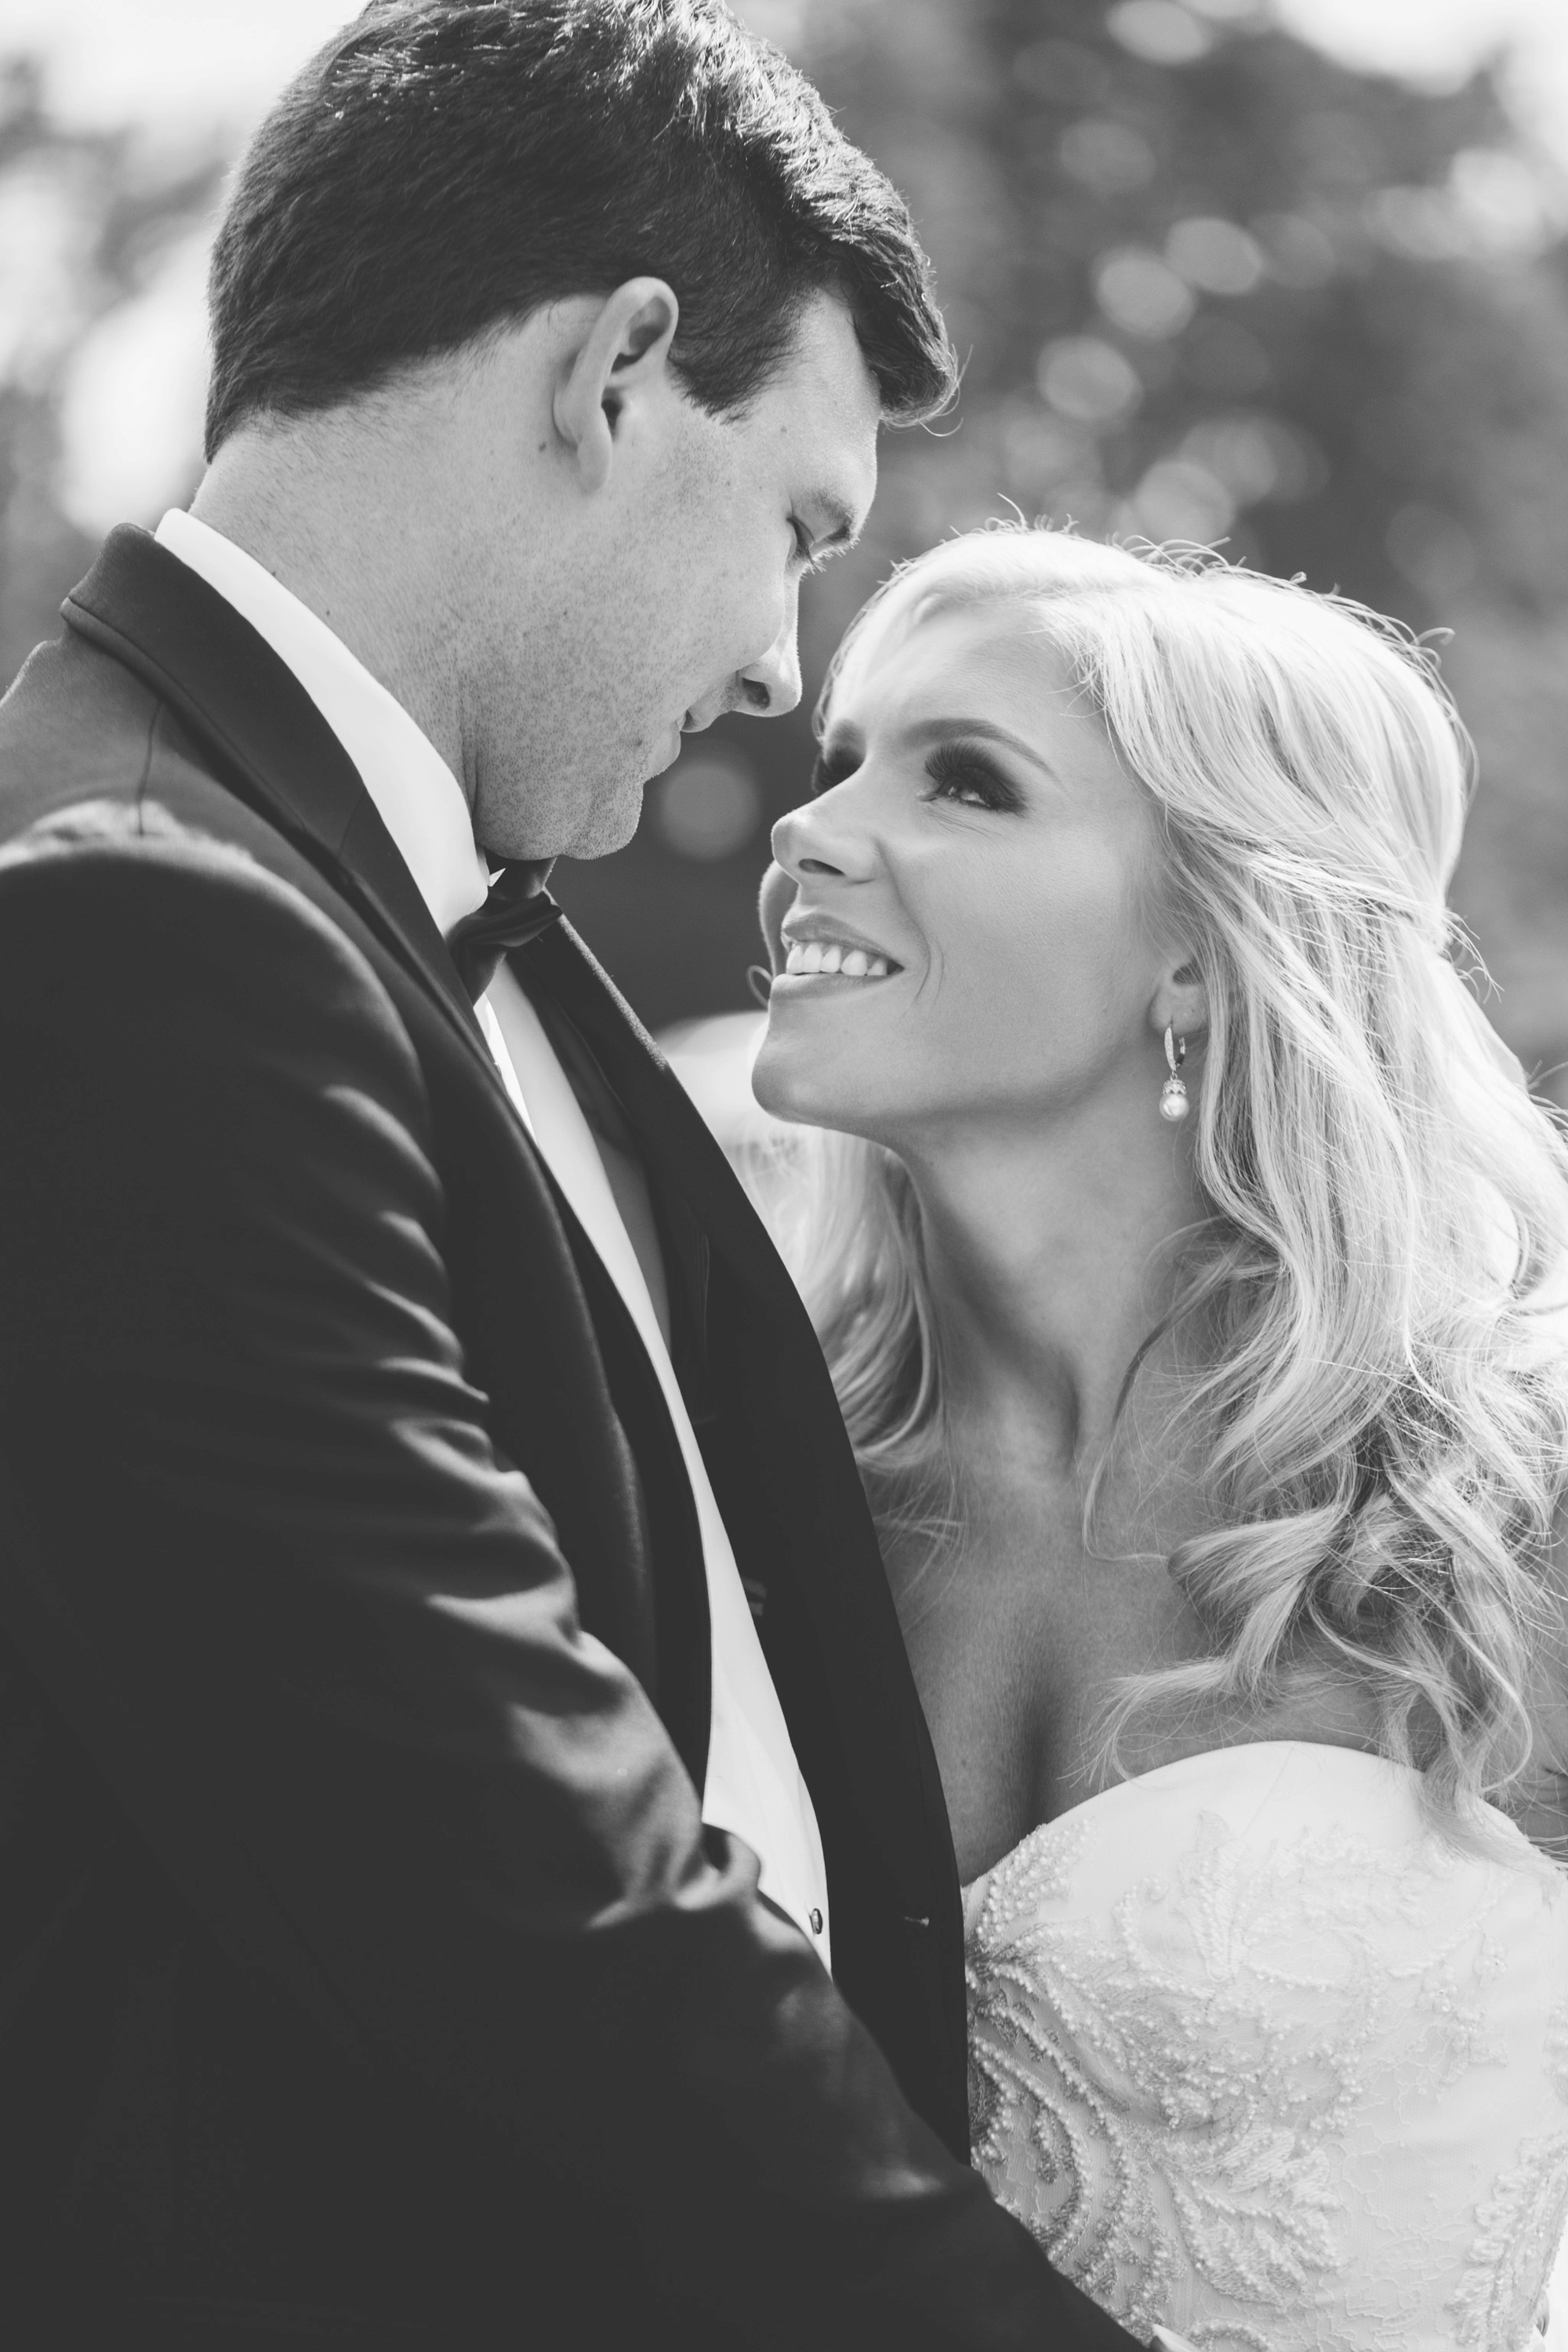 Classic black and white wedding picture captured by top destination wedding photographer Rebecca Cerasani